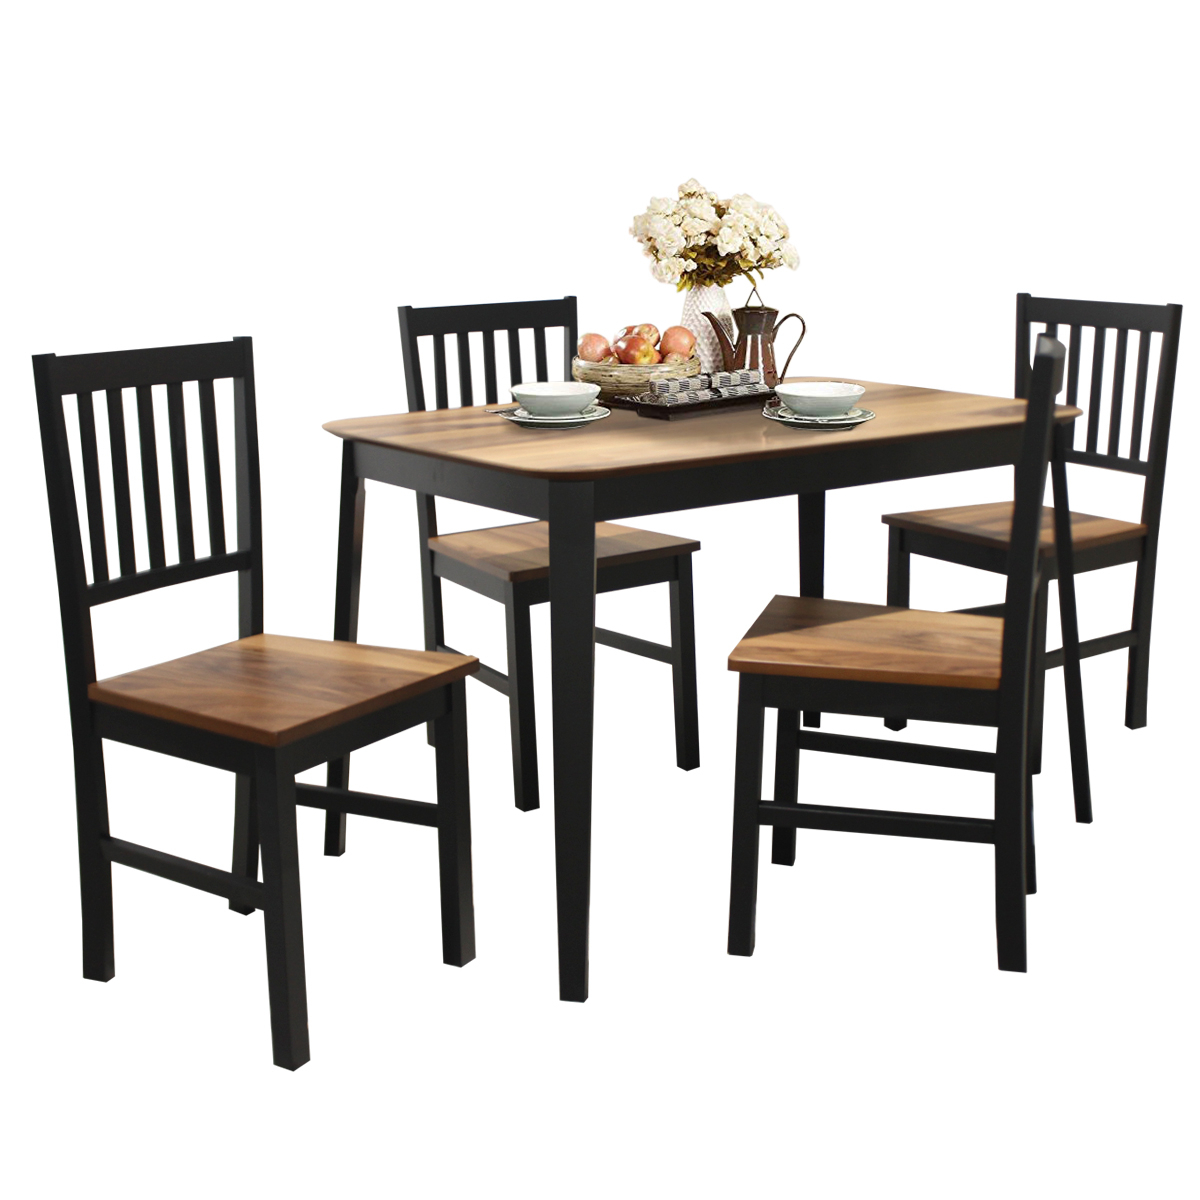 Costway 5 Pcs Mid Century Modern Black 29.5'' Dining Table Set 4 Chairs W/Wood Legs Kitchen Furniture